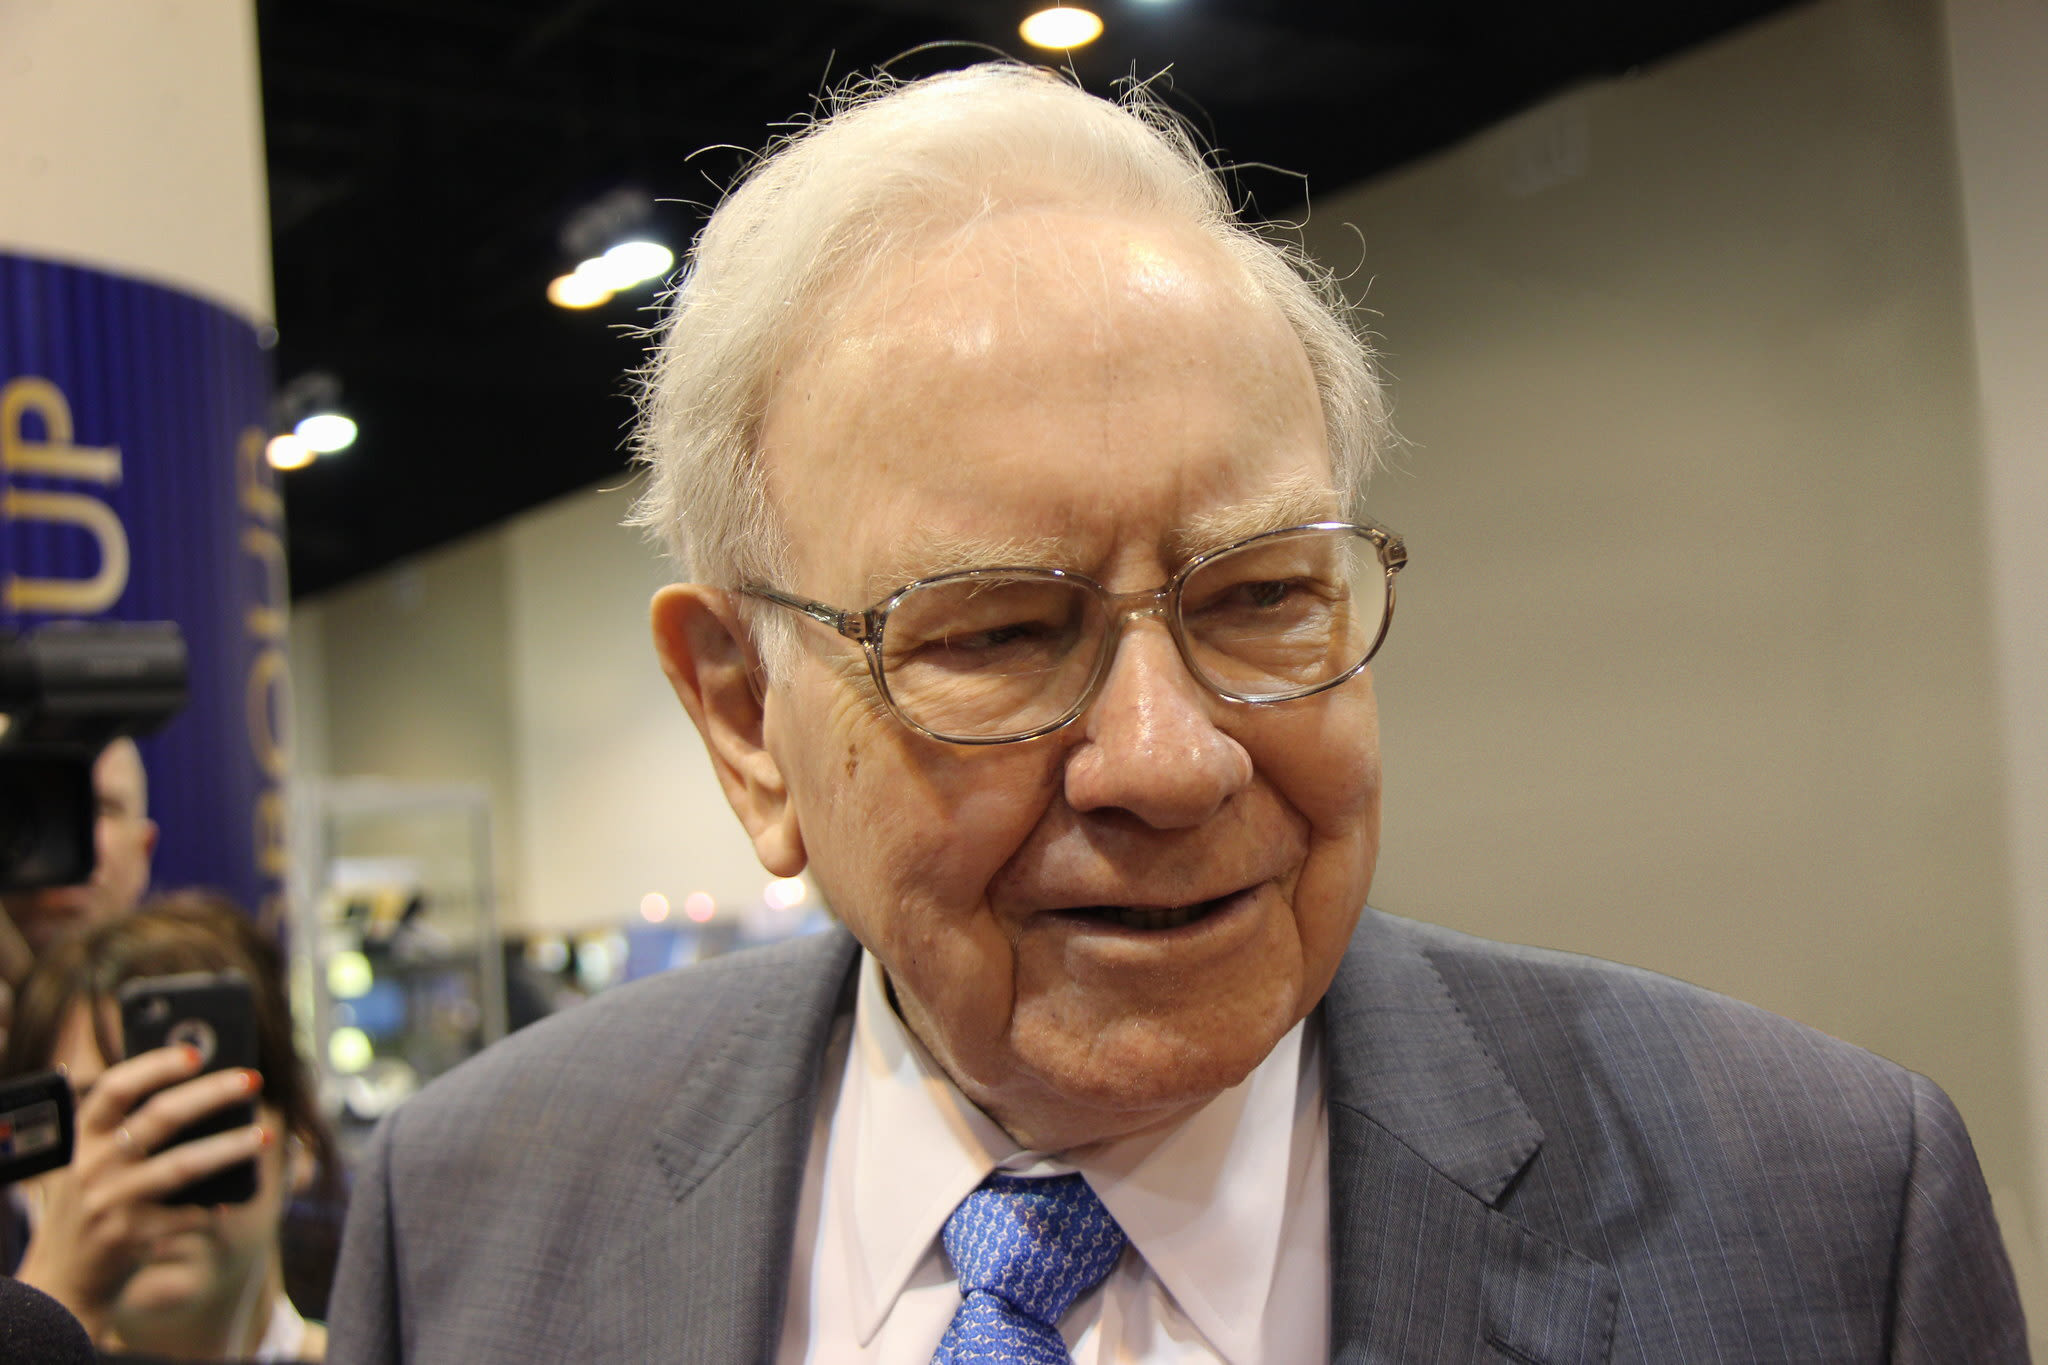 The Best Warren Buffett Stocks to Buy With $500 Right Now | The Motley Fool